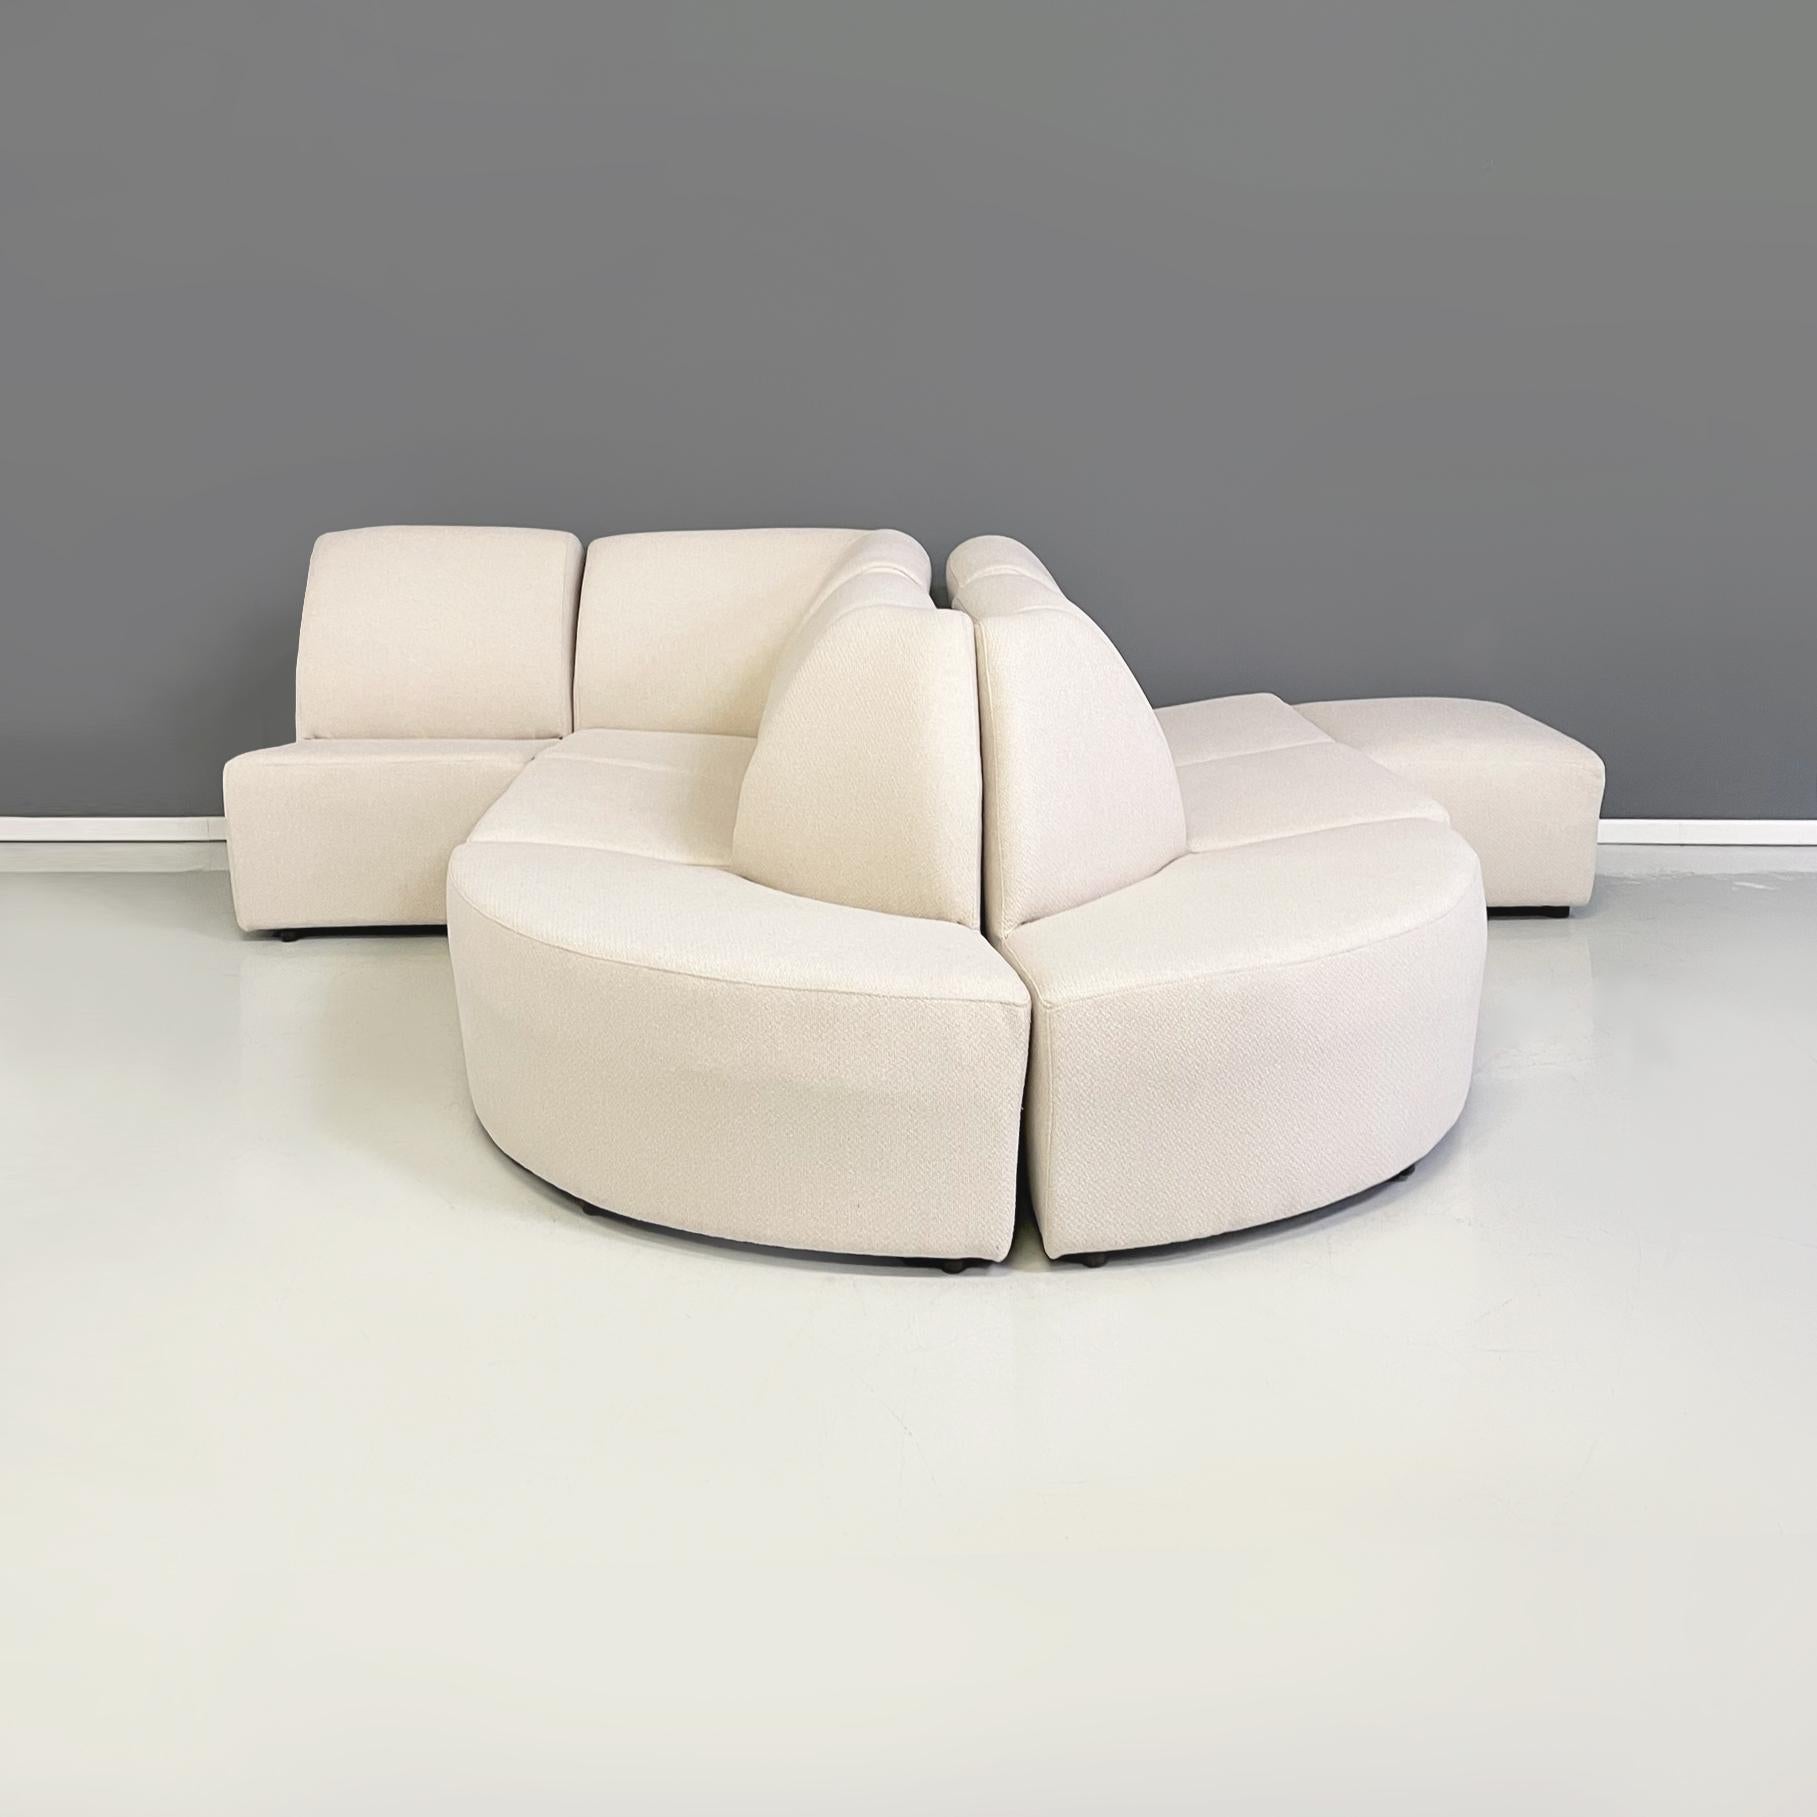 Italian modern Modular and corner sofa in white fabric, 1980s
Modular and corner sofa entirely upholstered and covered in cream white fabric. The sofa has a square seat and a rounded backrest. The two external modules have a semicircle seat. There